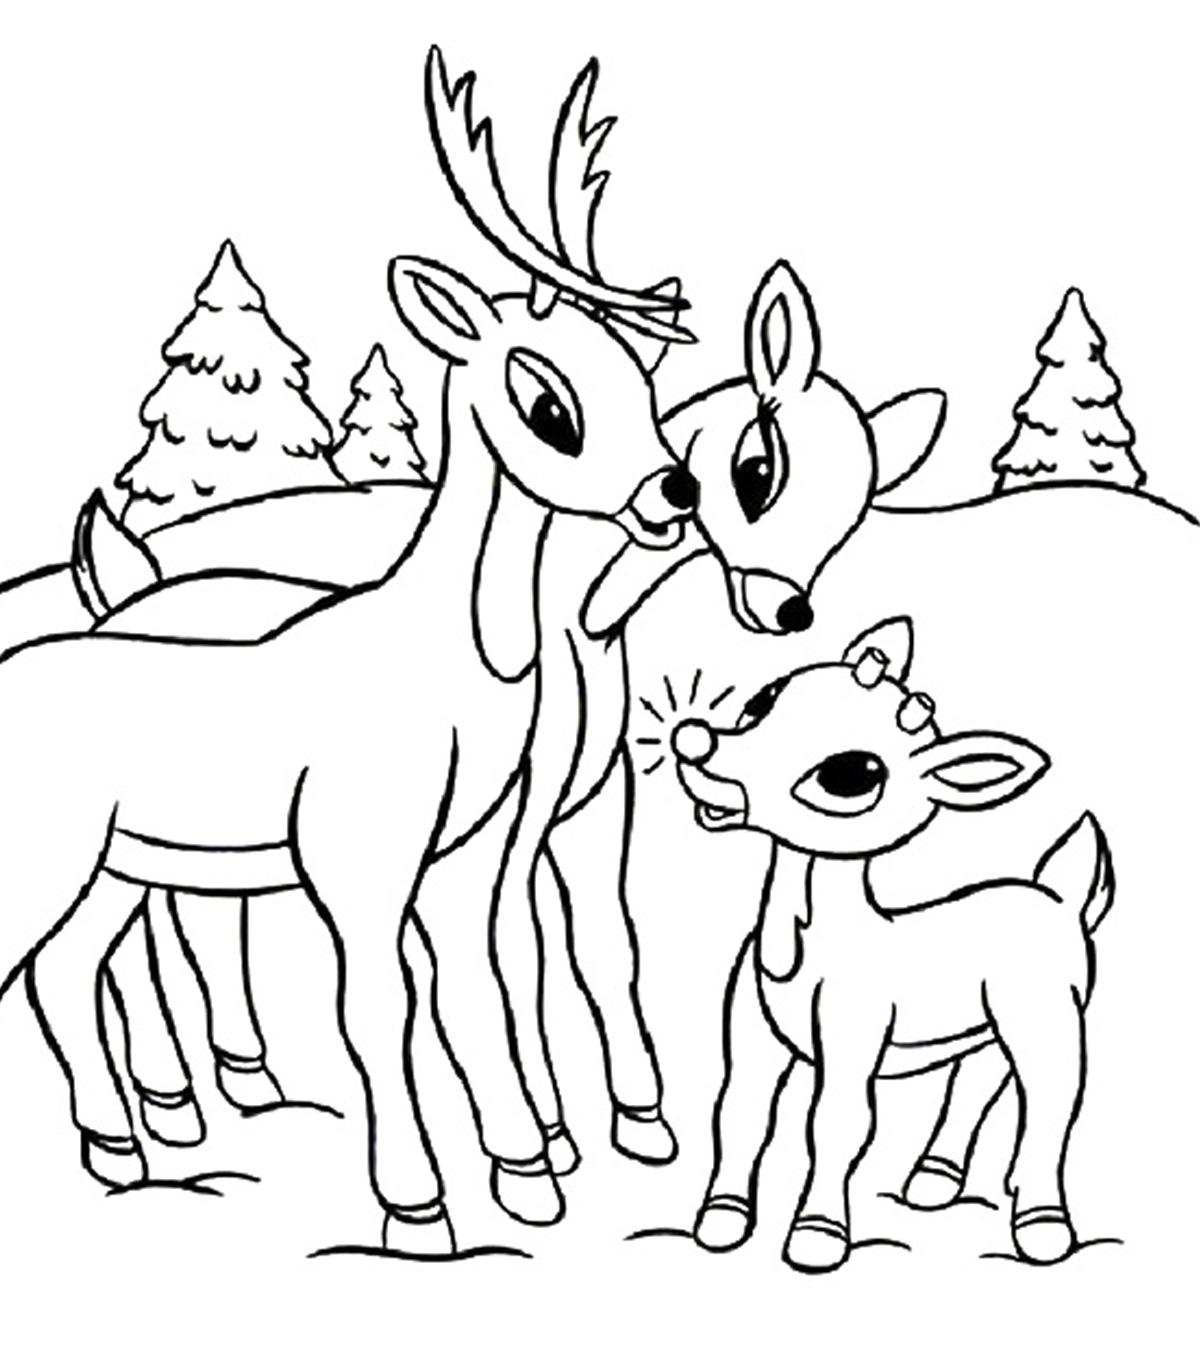 Santa And Rudolph Coloring Pages 20 Best Rudolph The Red Nosed Reindeer Coloring Pages For Your